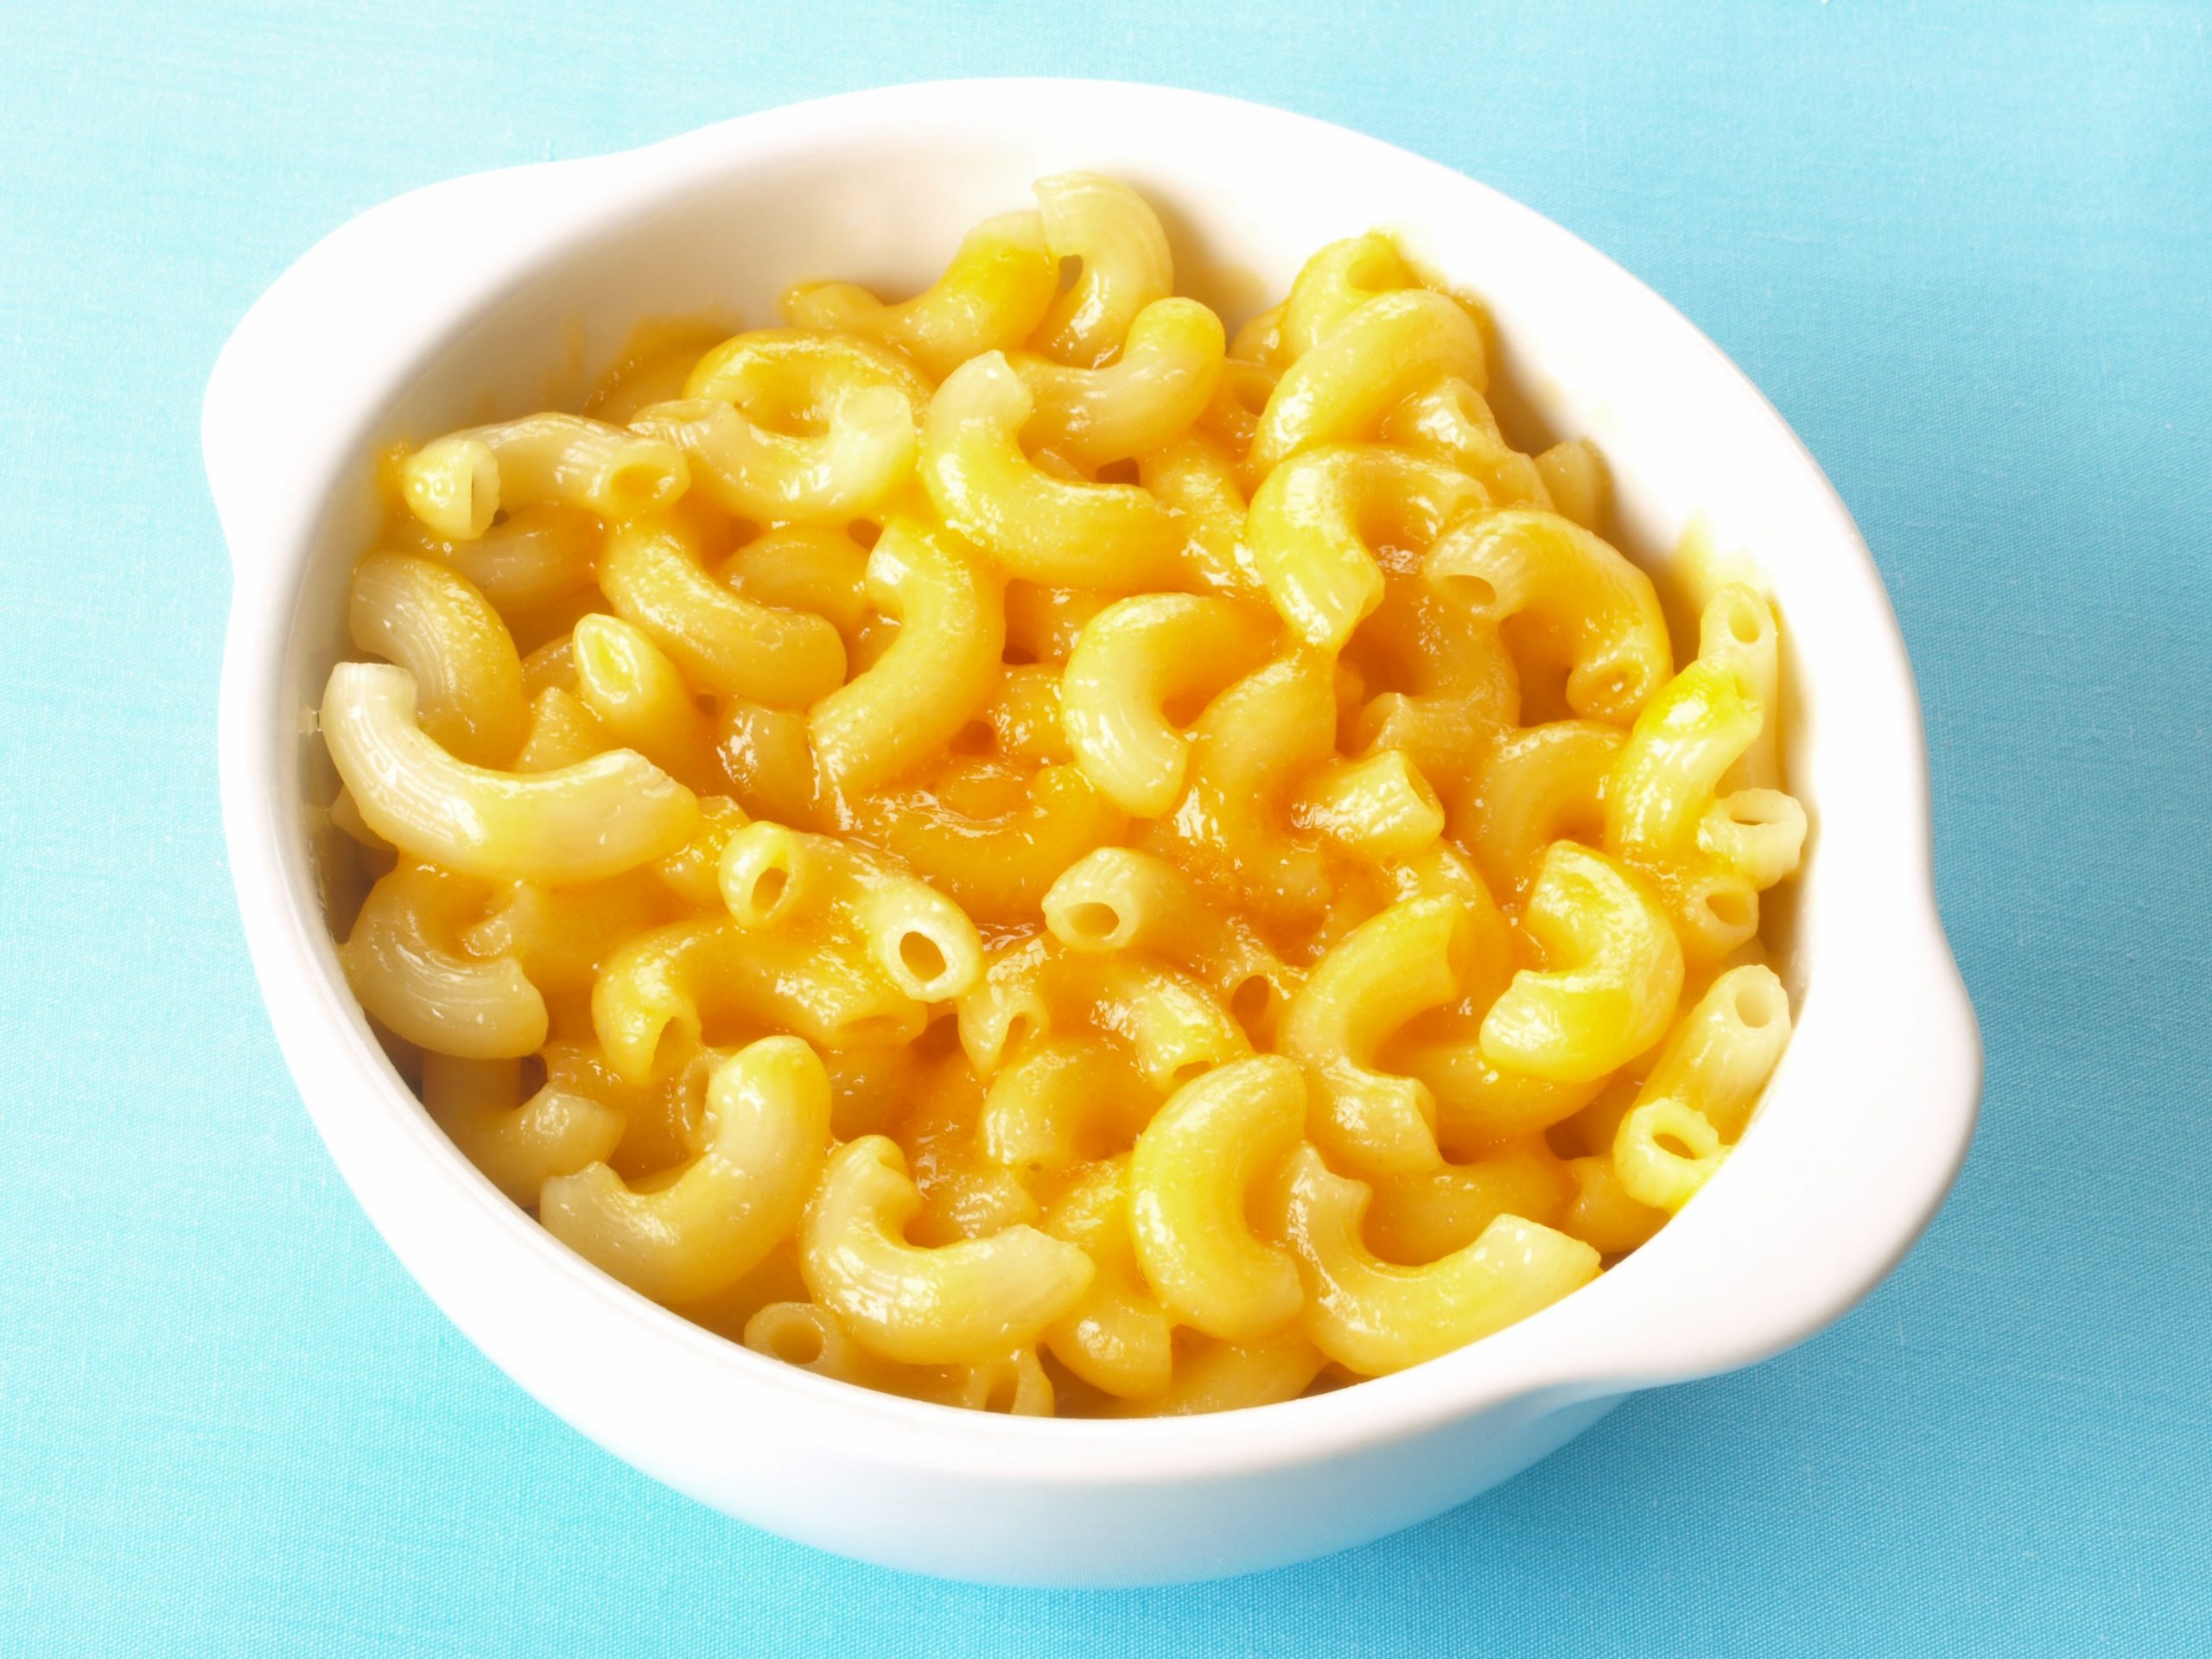 Why Stovetop Mac and Cheese Is So Much Better Than Baked